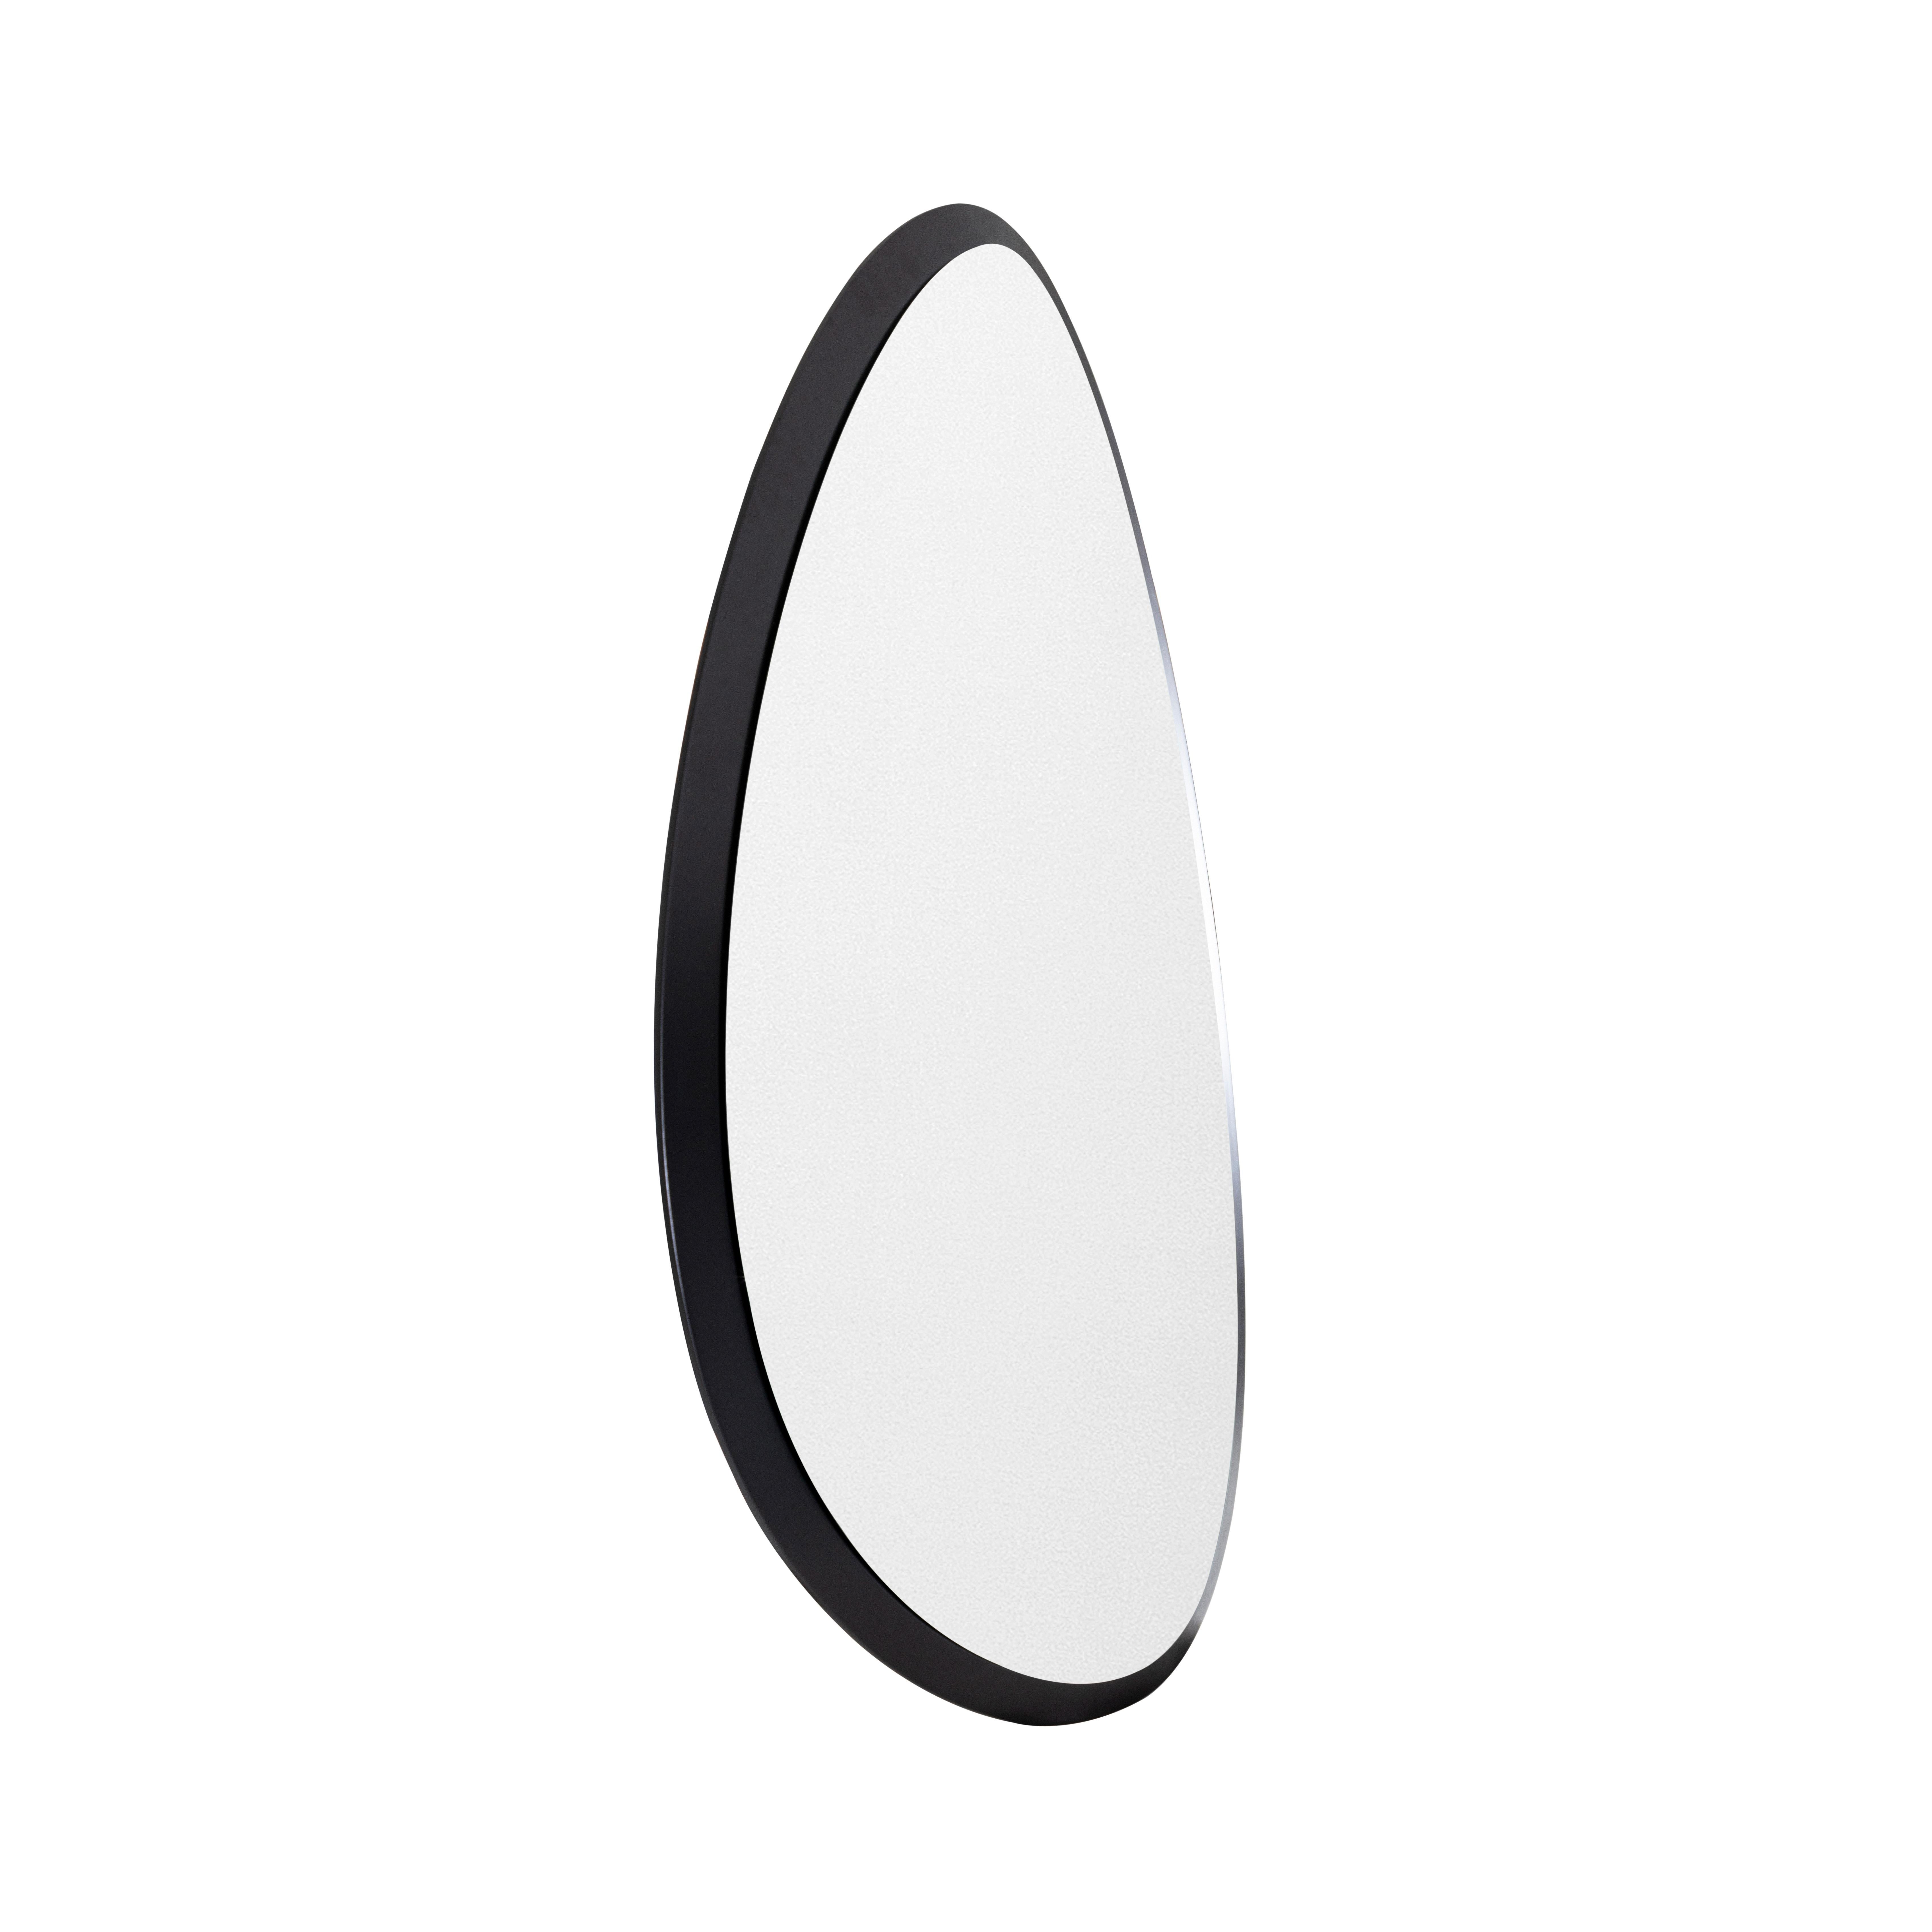 Pante Mirror In Black Wood Finish, Set of 4 For Sale 4